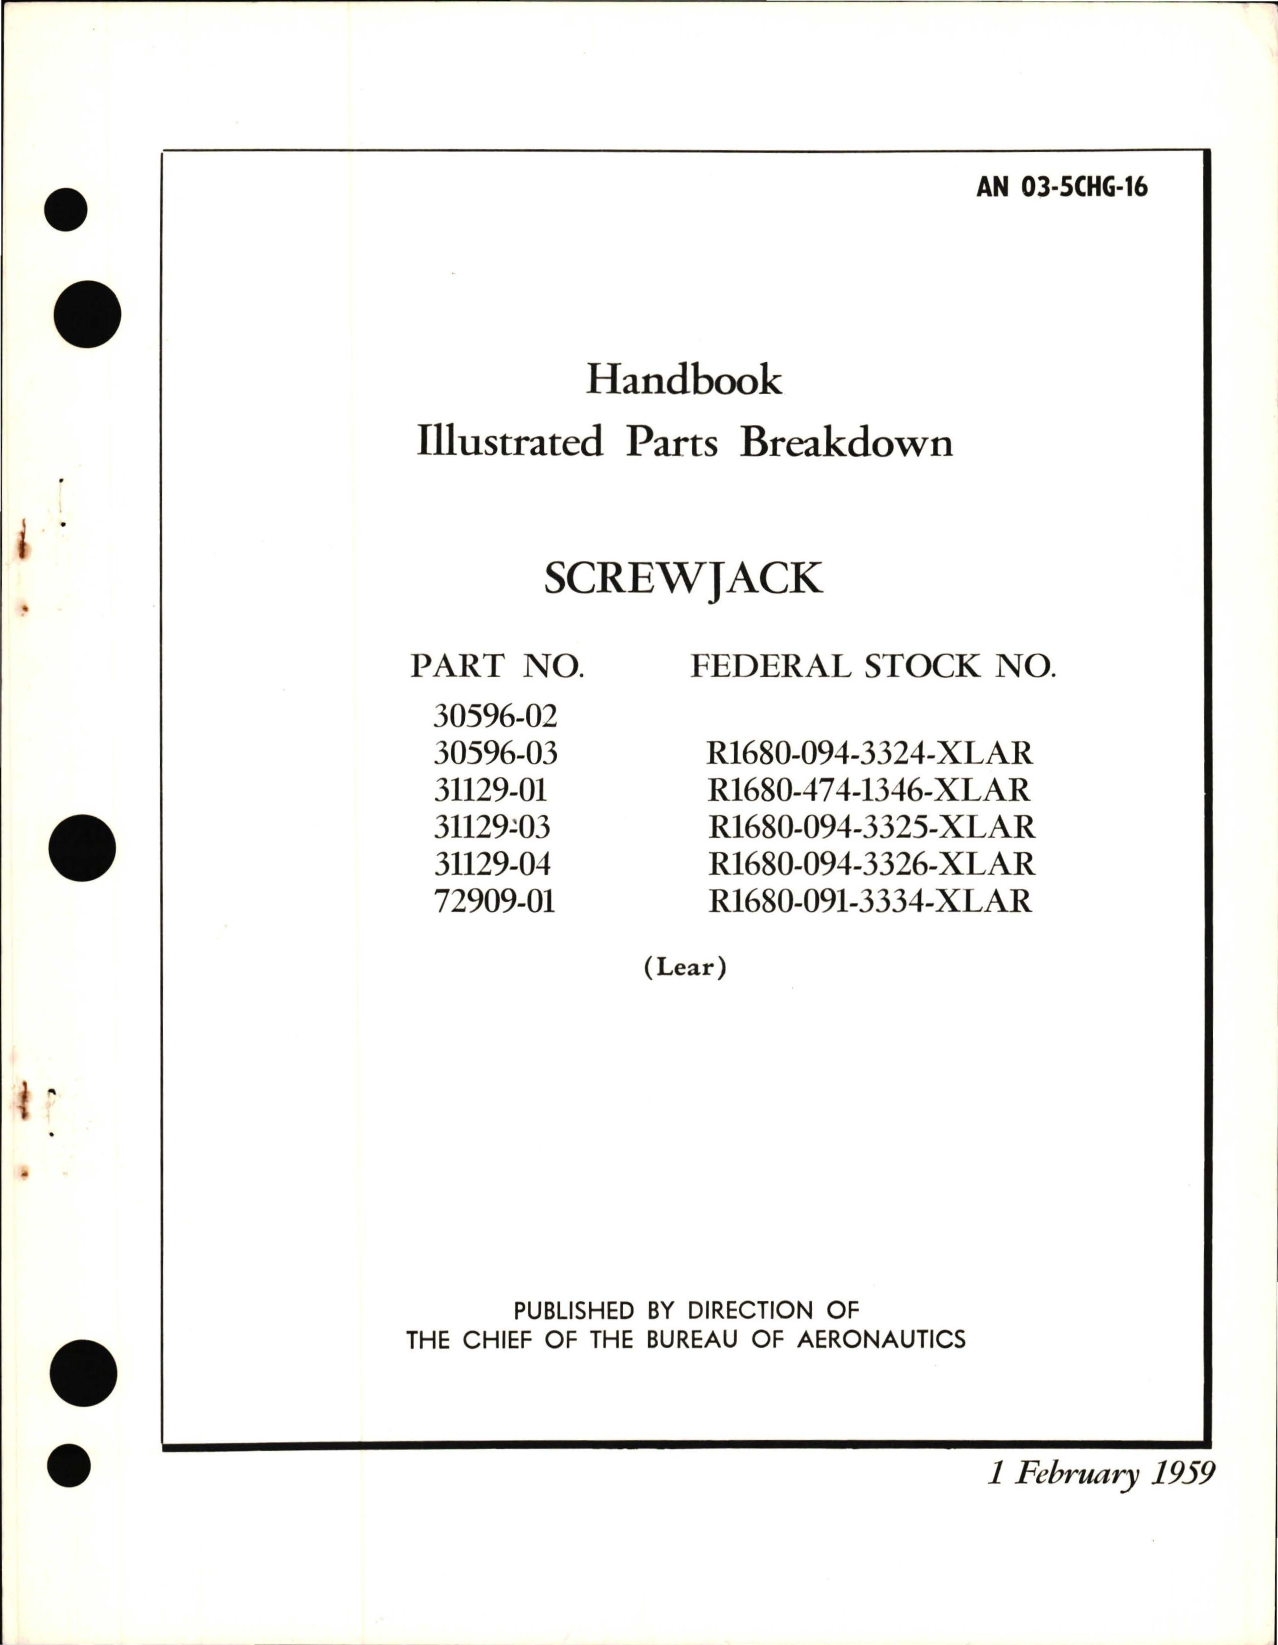 Sample page 1 from AirCorps Library document: Illustrated Parts Breakdown for Screwjack, Parts 30596-02, 30596-03, 31129-01, 31129-03, 31129-04, and 72909-01